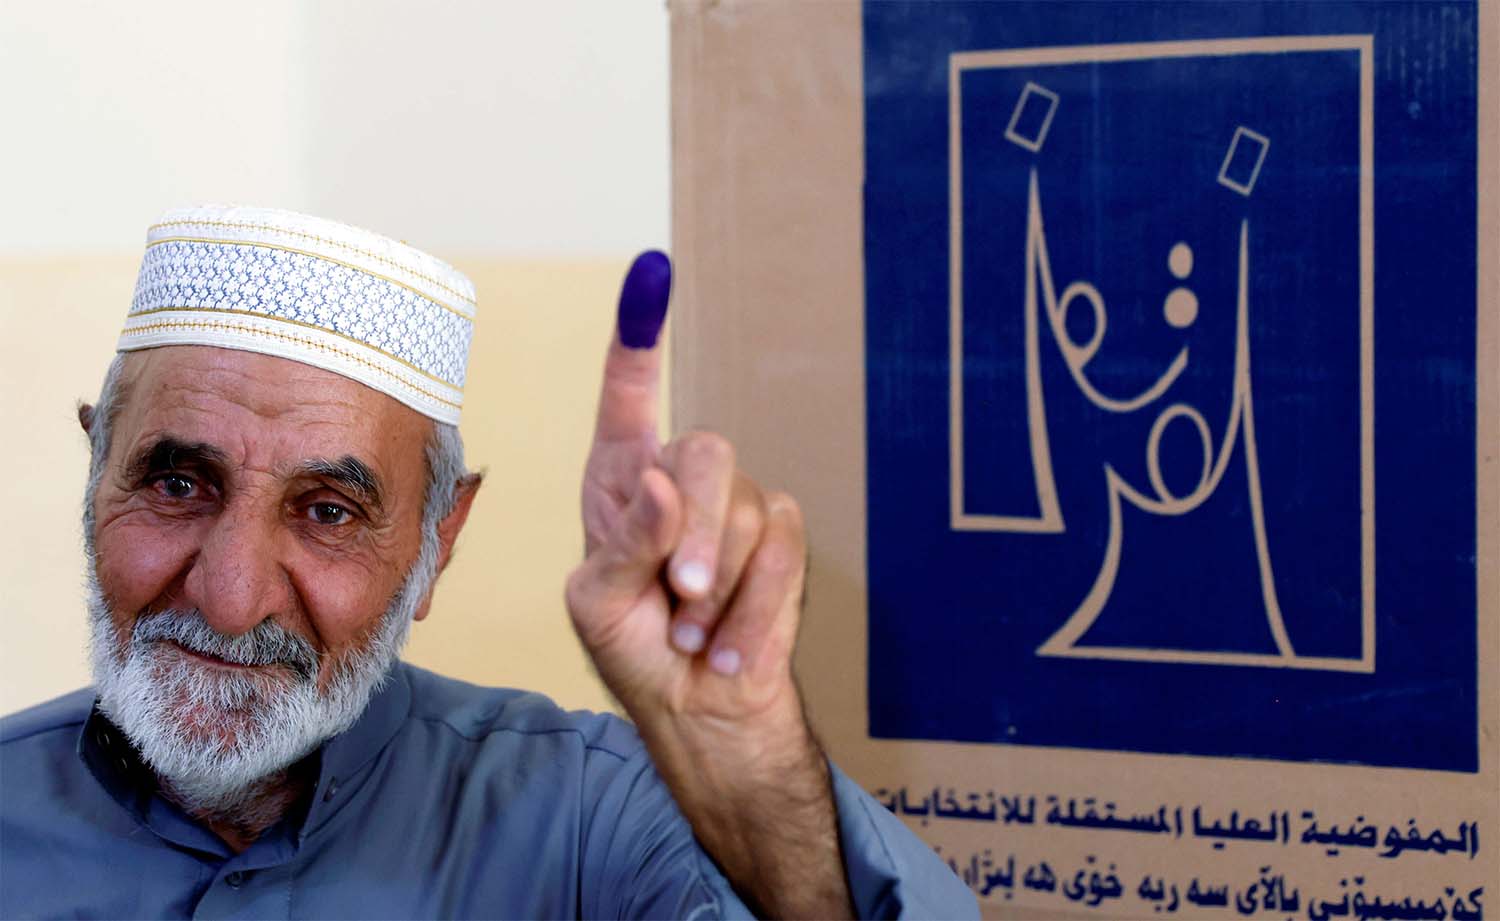 Sunday's election is taking place under a new election law that divides Iraq into smaller constituencies